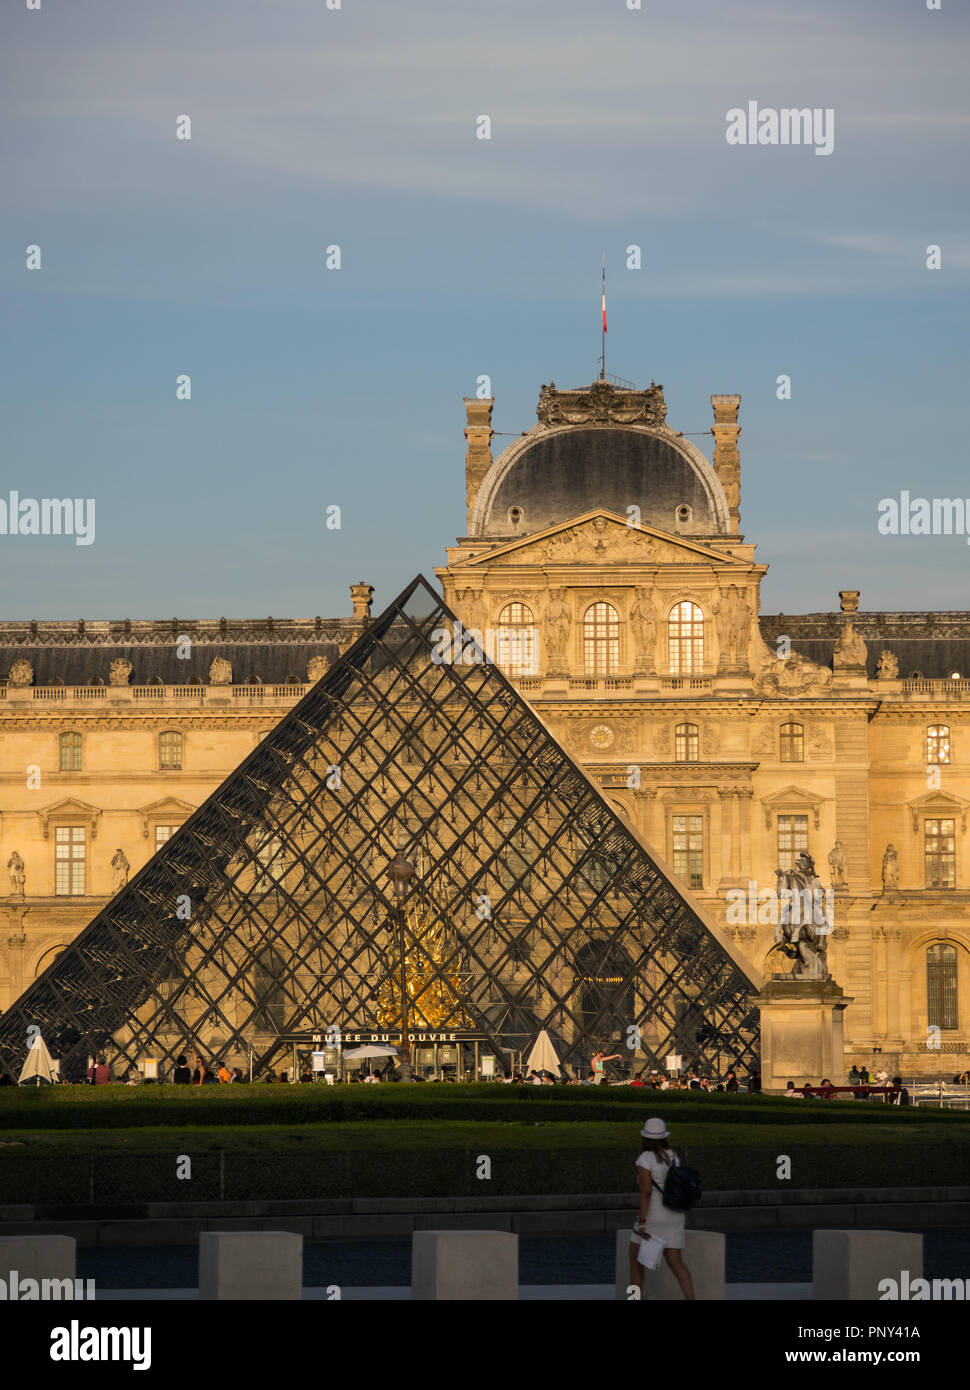 Tourist admiring the Louvre building at sunset Stock Photo